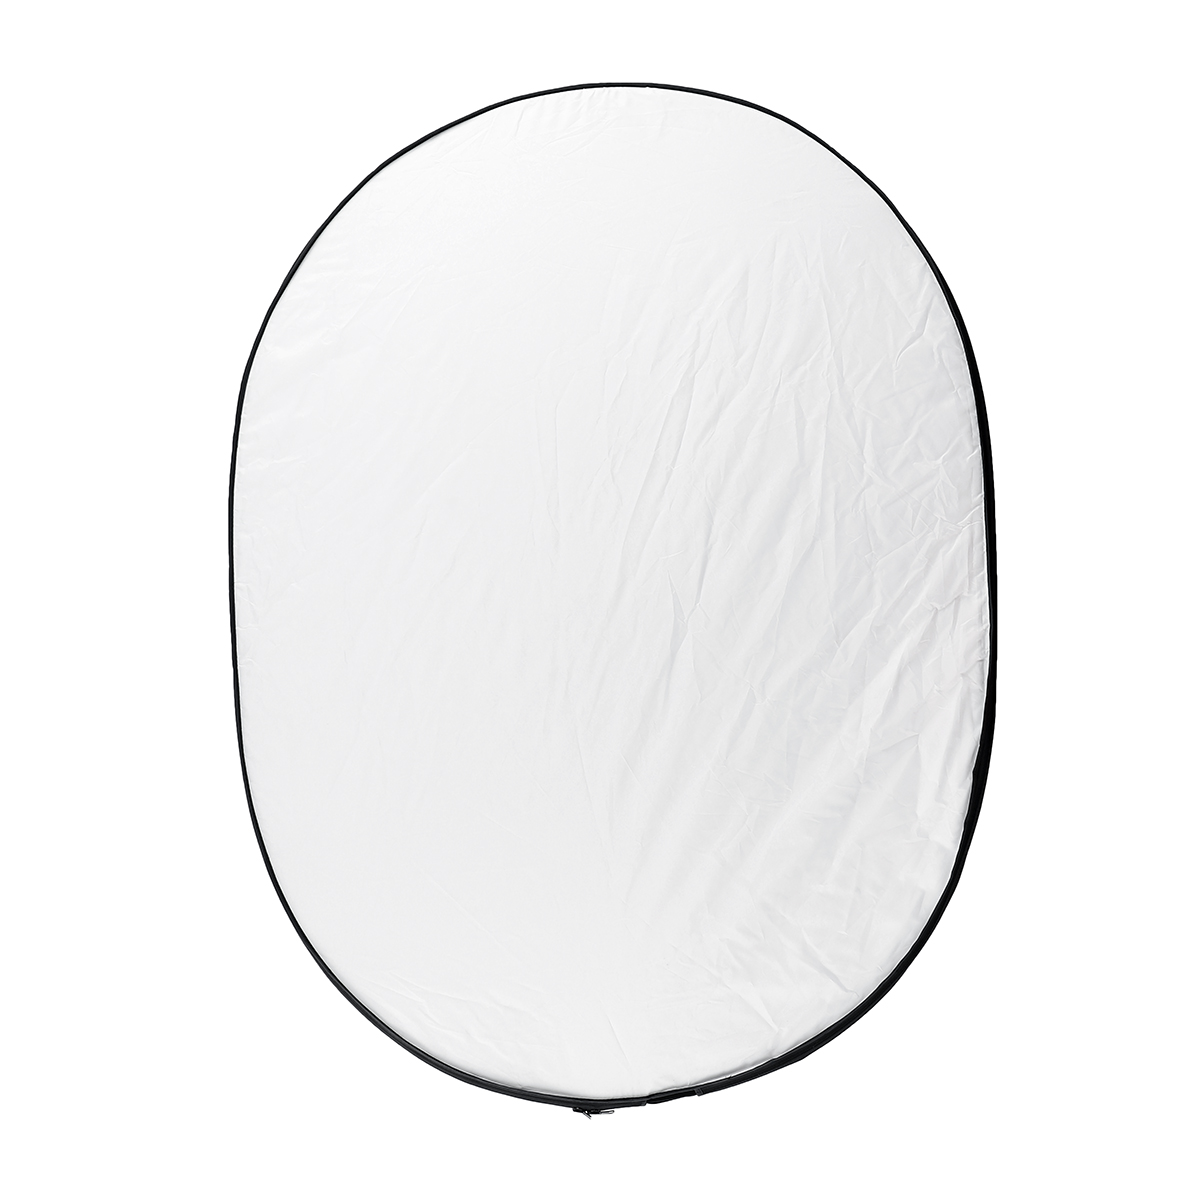 Find 7 in 1 Light Diffuser Round Reflector Multi-Disc + Bag For photography Portable for Sale on Gipsybee.com with cryptocurrencies